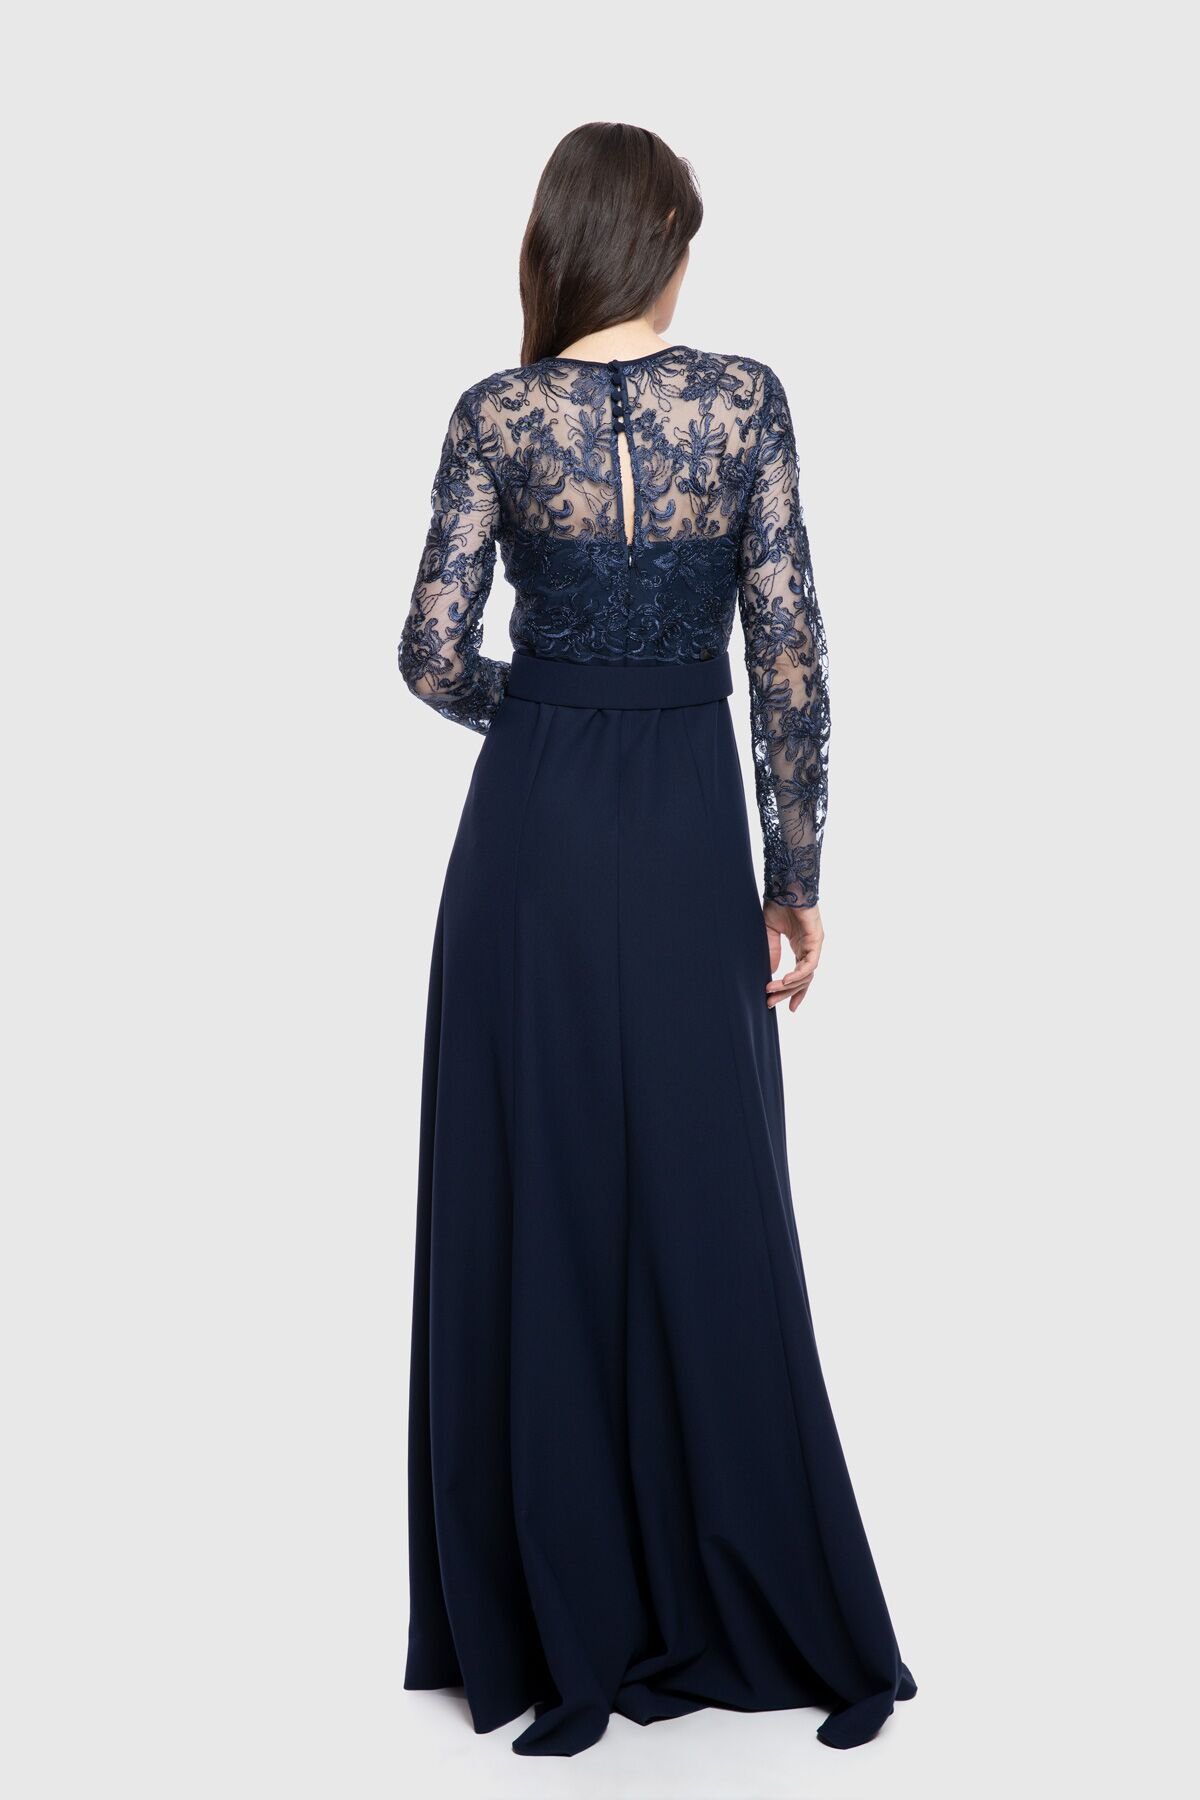 With Lace Detailed Slit Top Long Navy Blue Dress